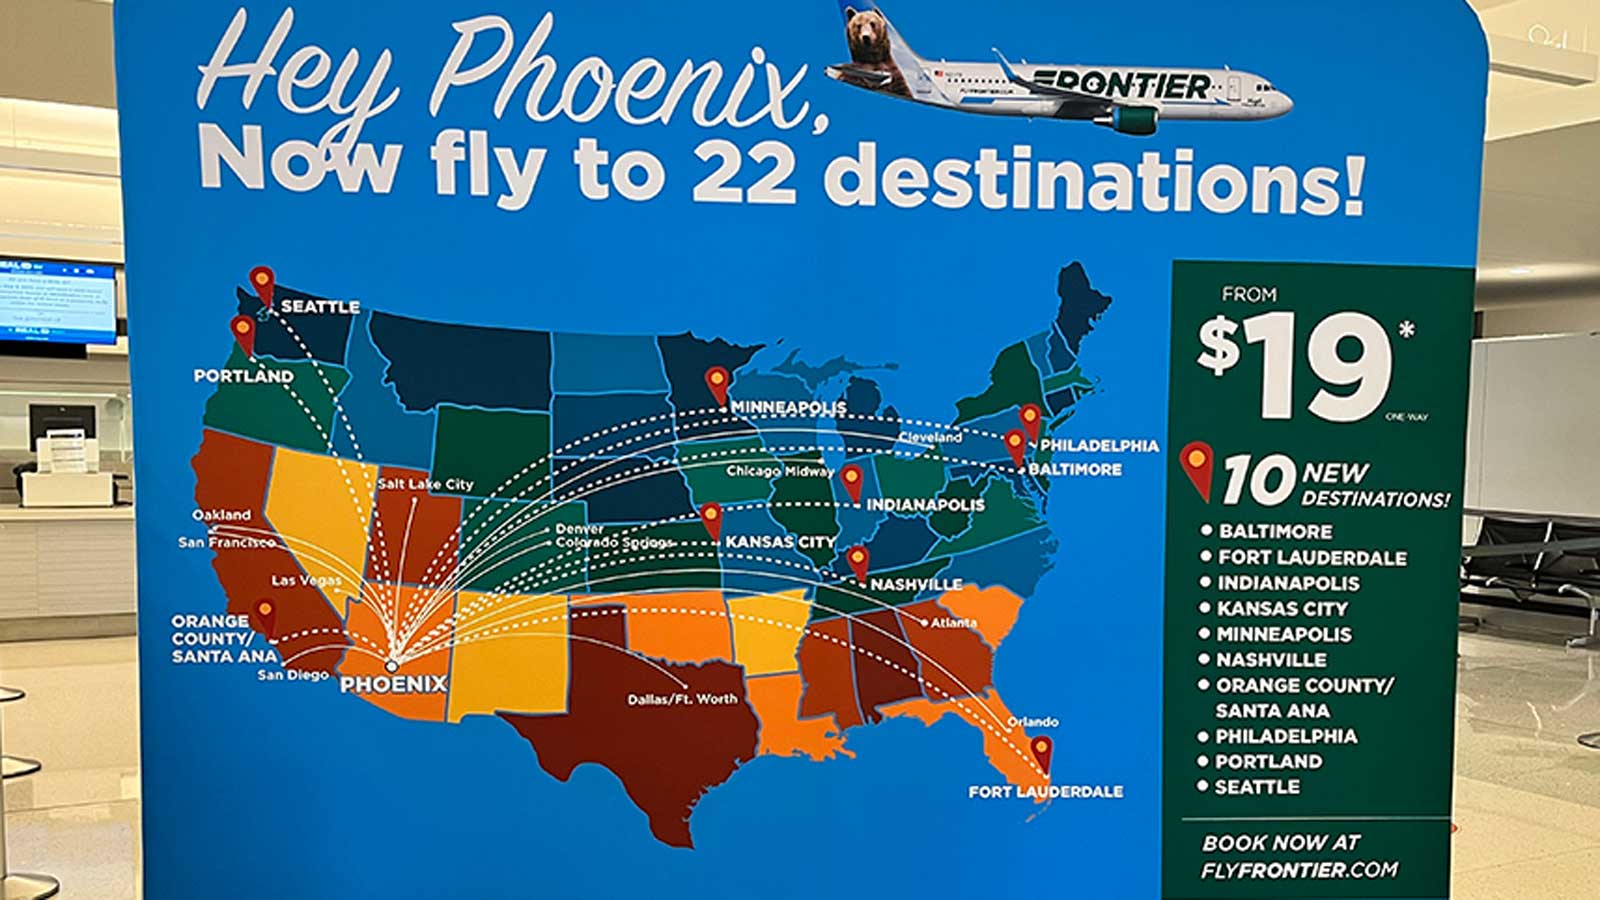 Frontier Airlines adding 10 direct destinations out of Phoenix Sky Harbor